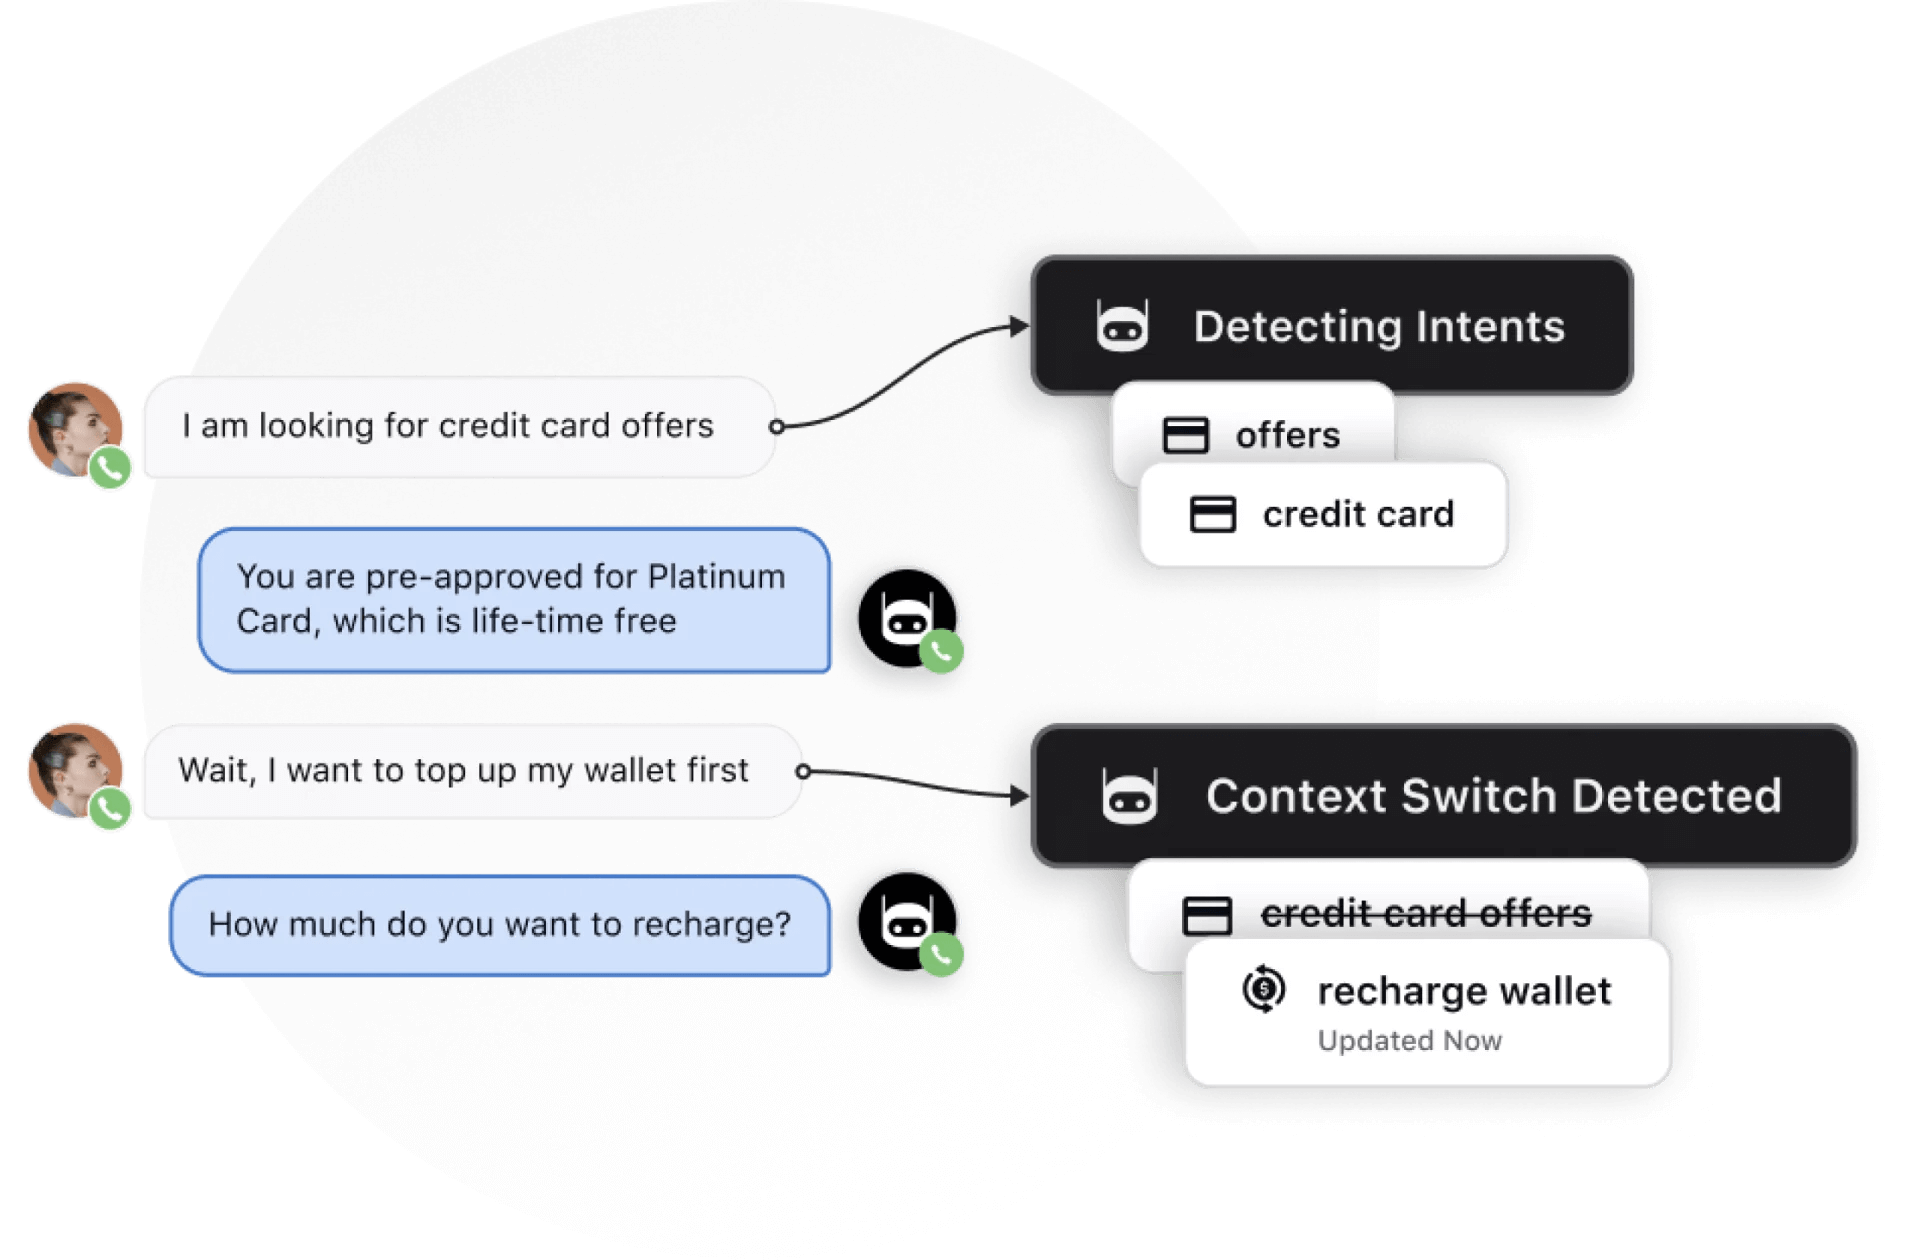 Sprinklr’s Conversational AI detects intent and context switch in real time